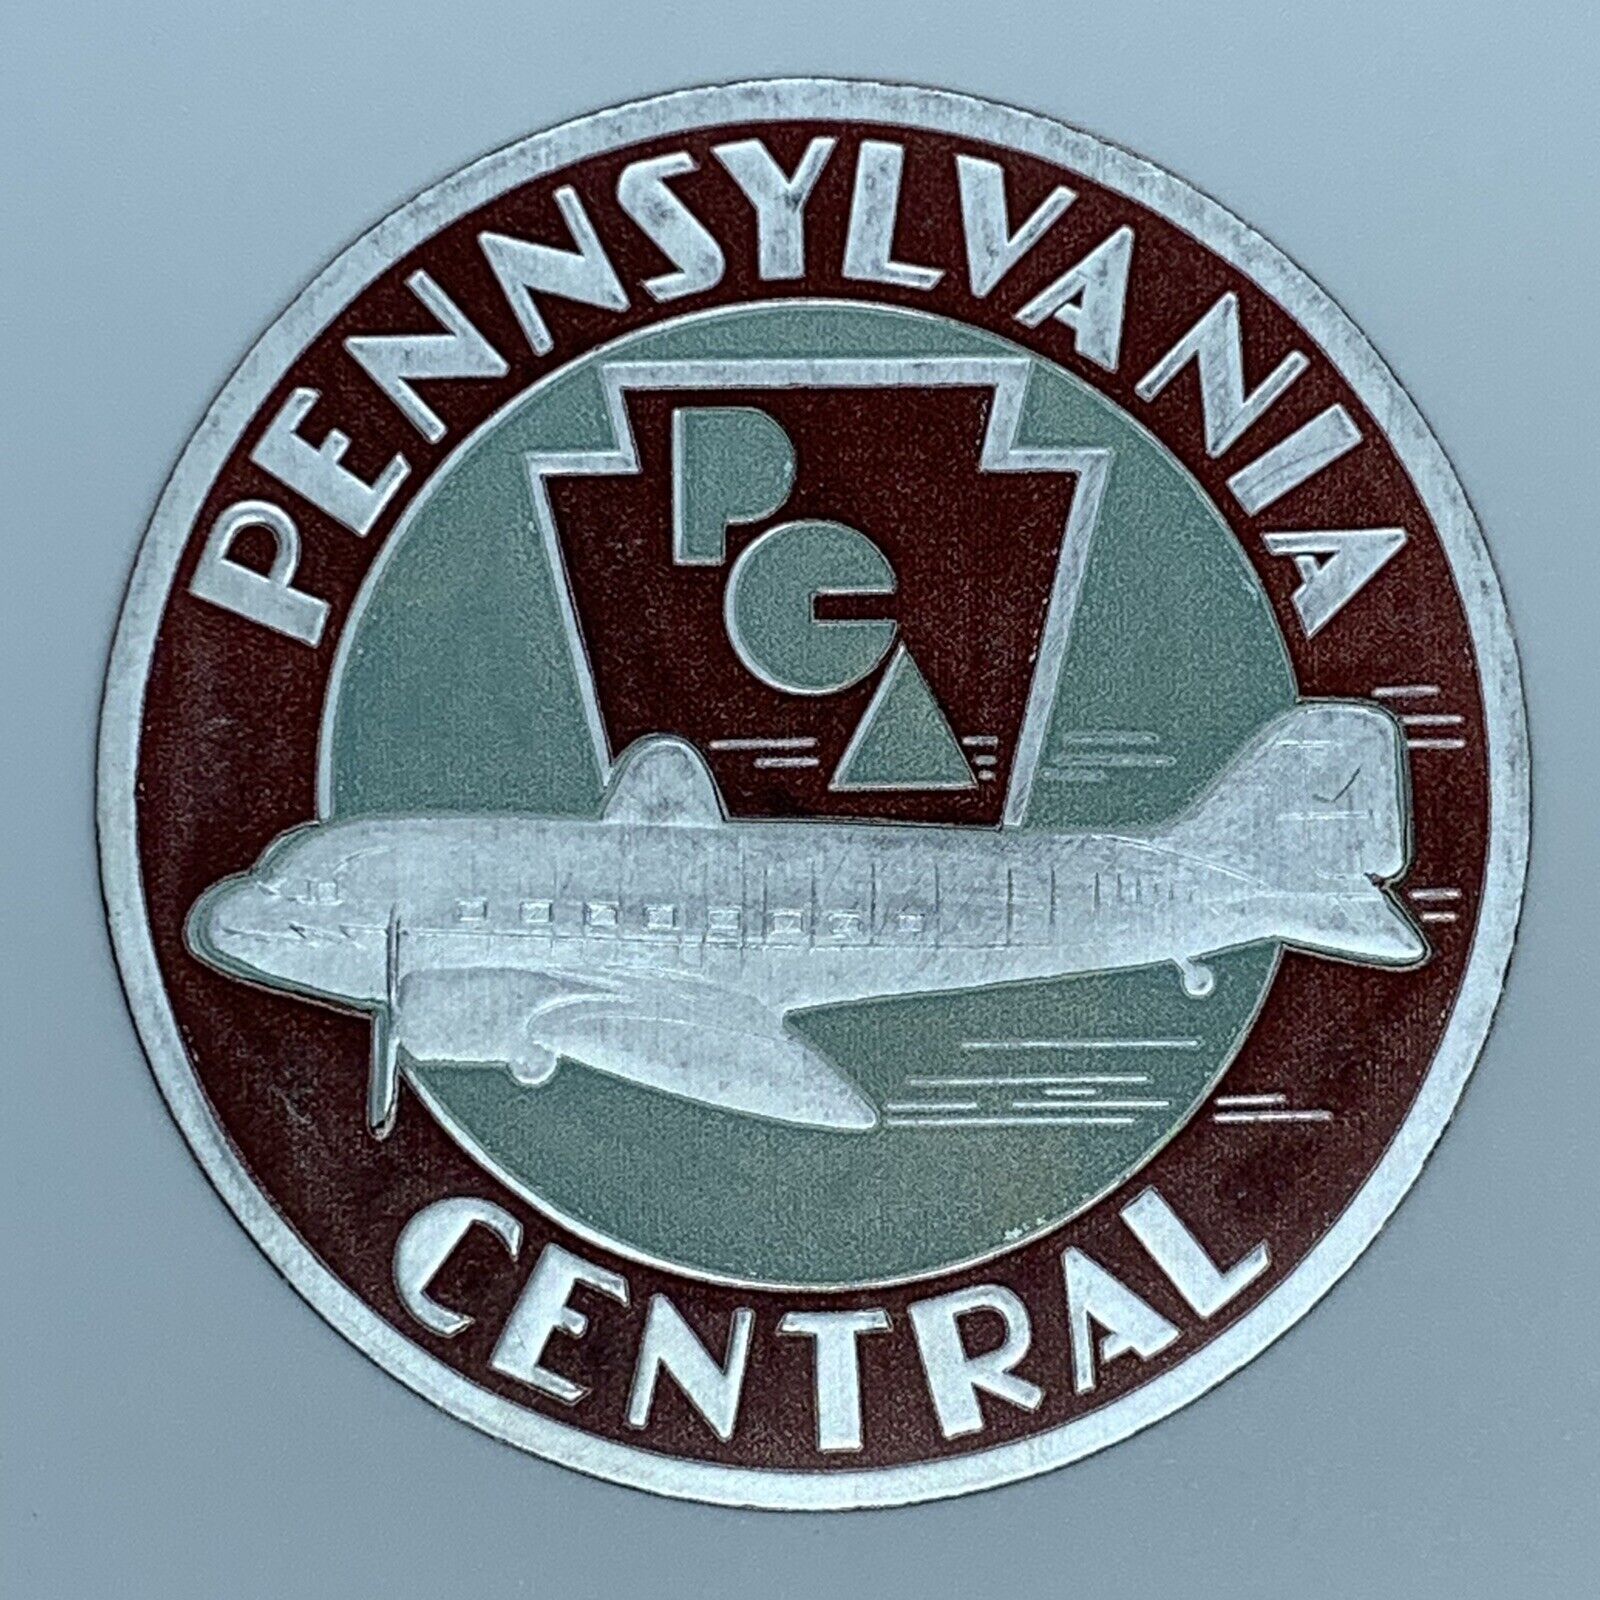 PENNSYLVANIA CENTRAL AIRLINES PCA ROUND DECAL ADHESIVE LABEL MAROON SILVER